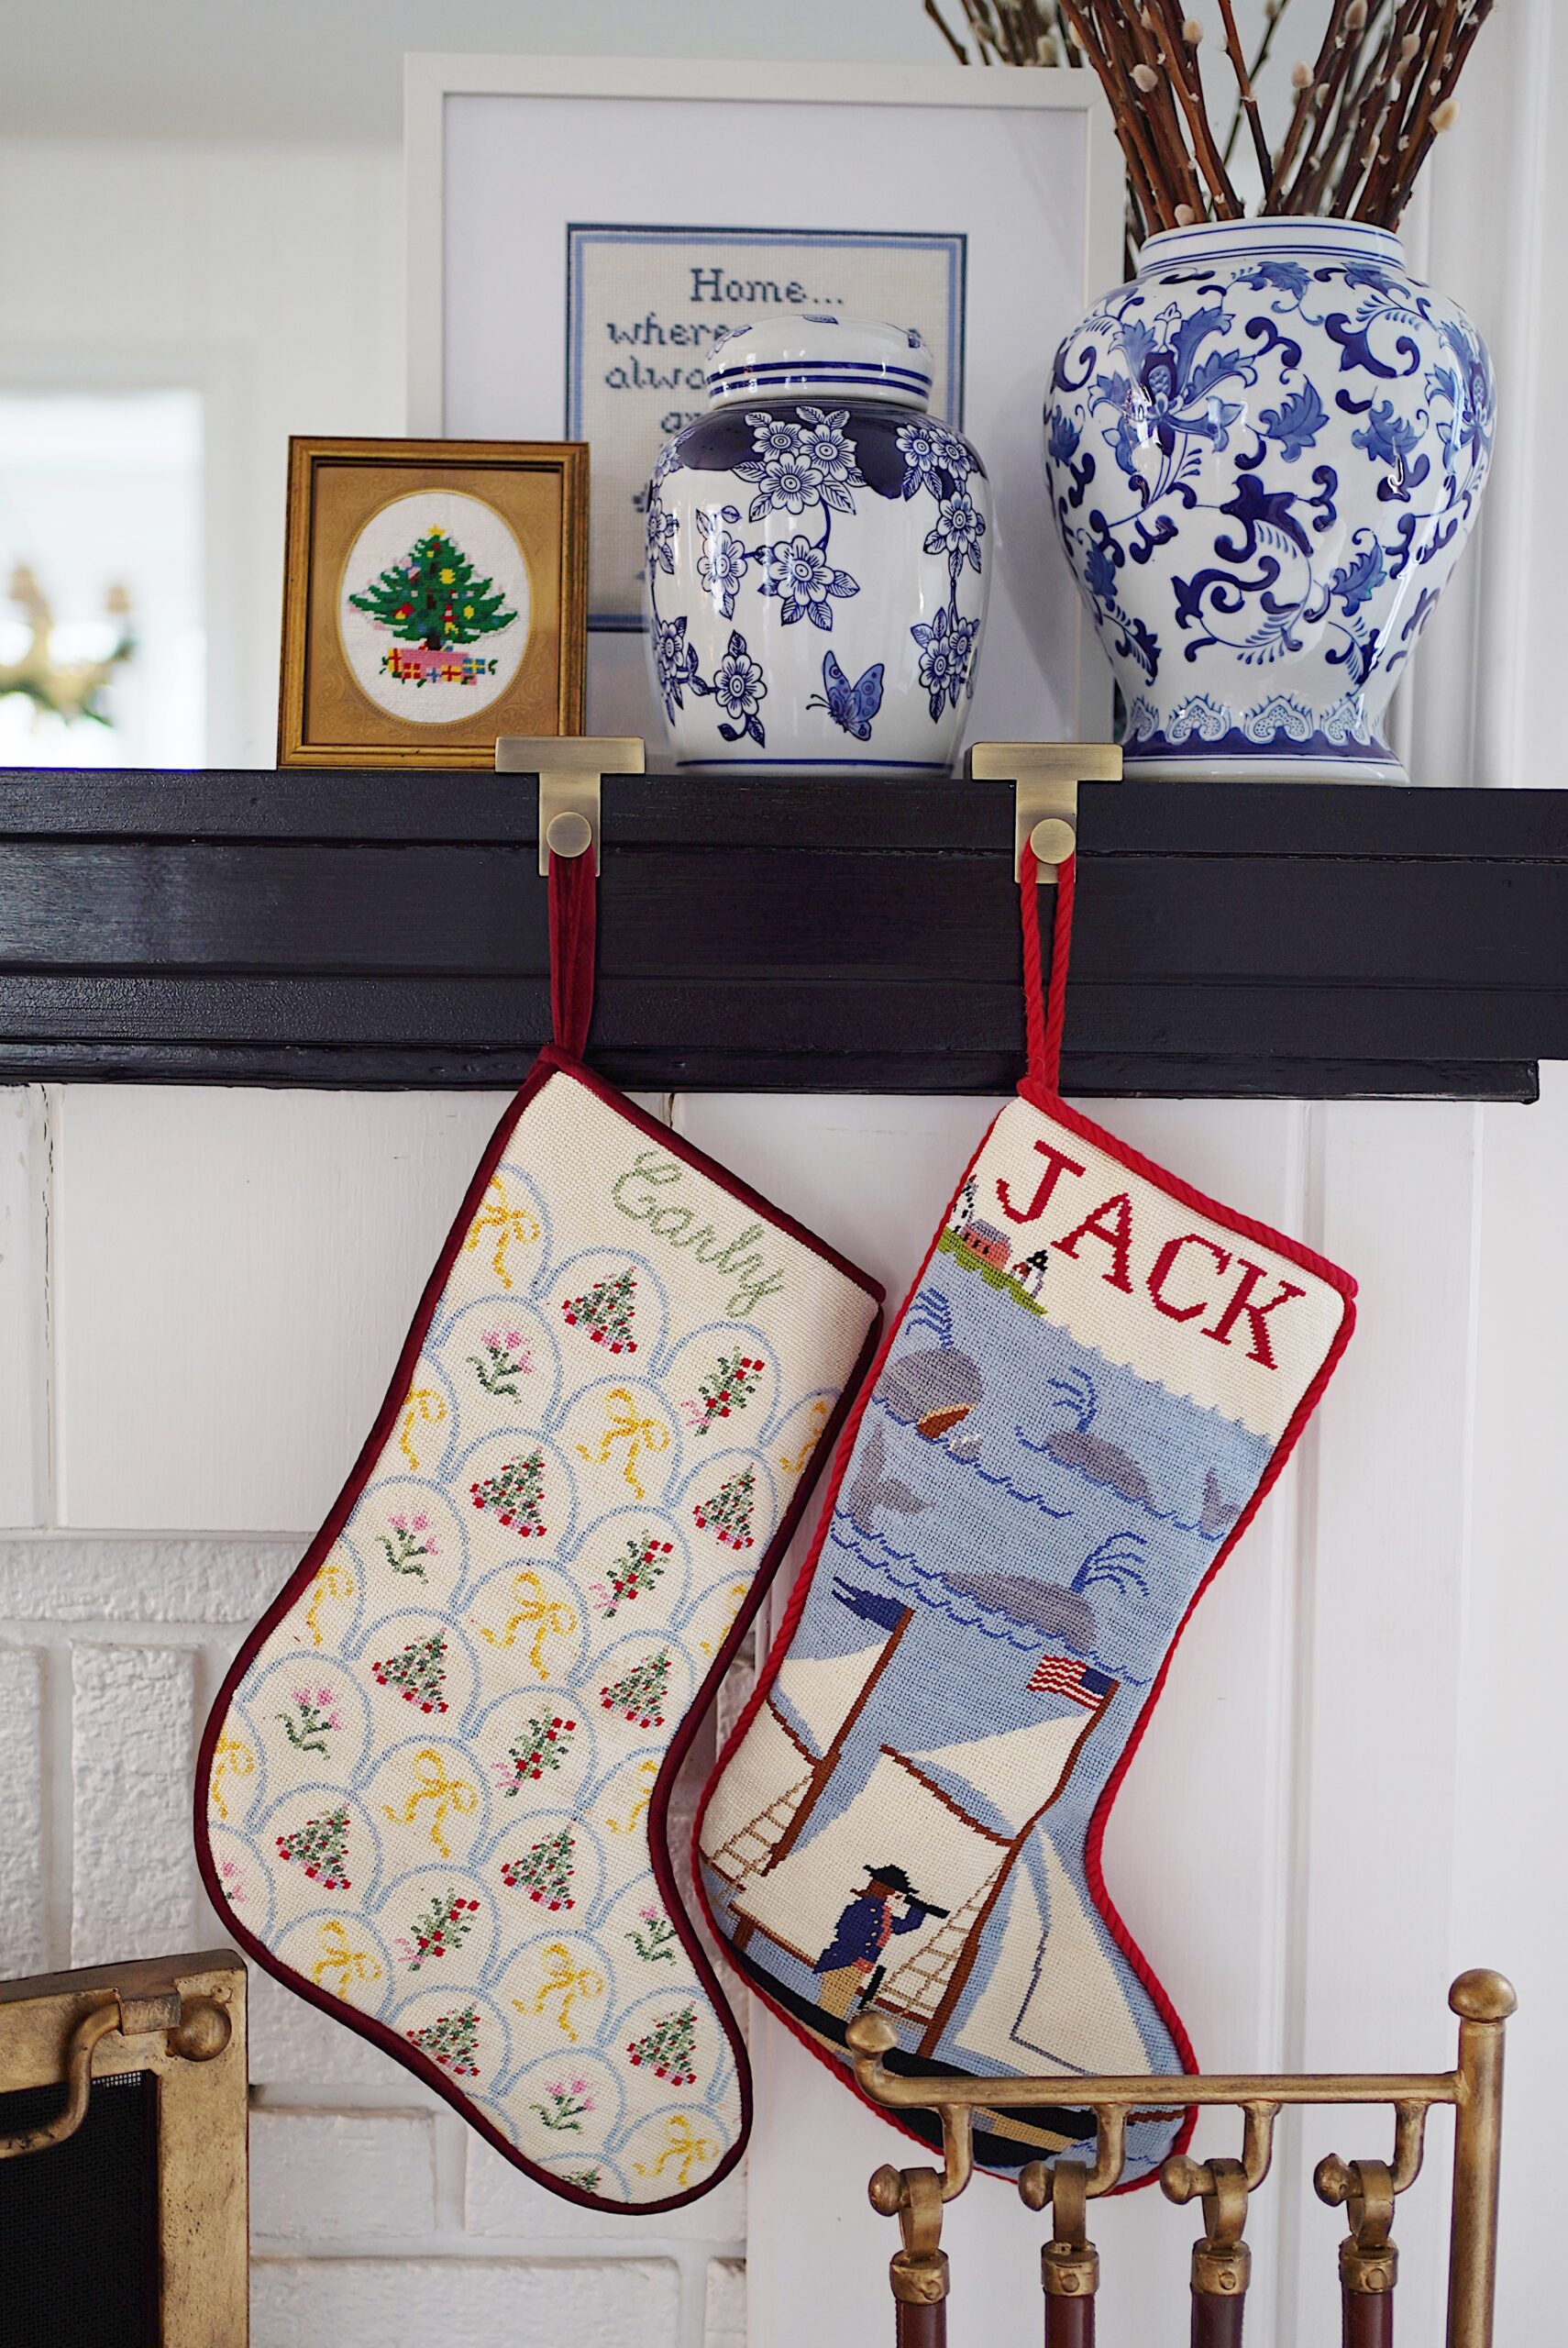 CARLY OUR NEEDLEPOINT STOCKINGS